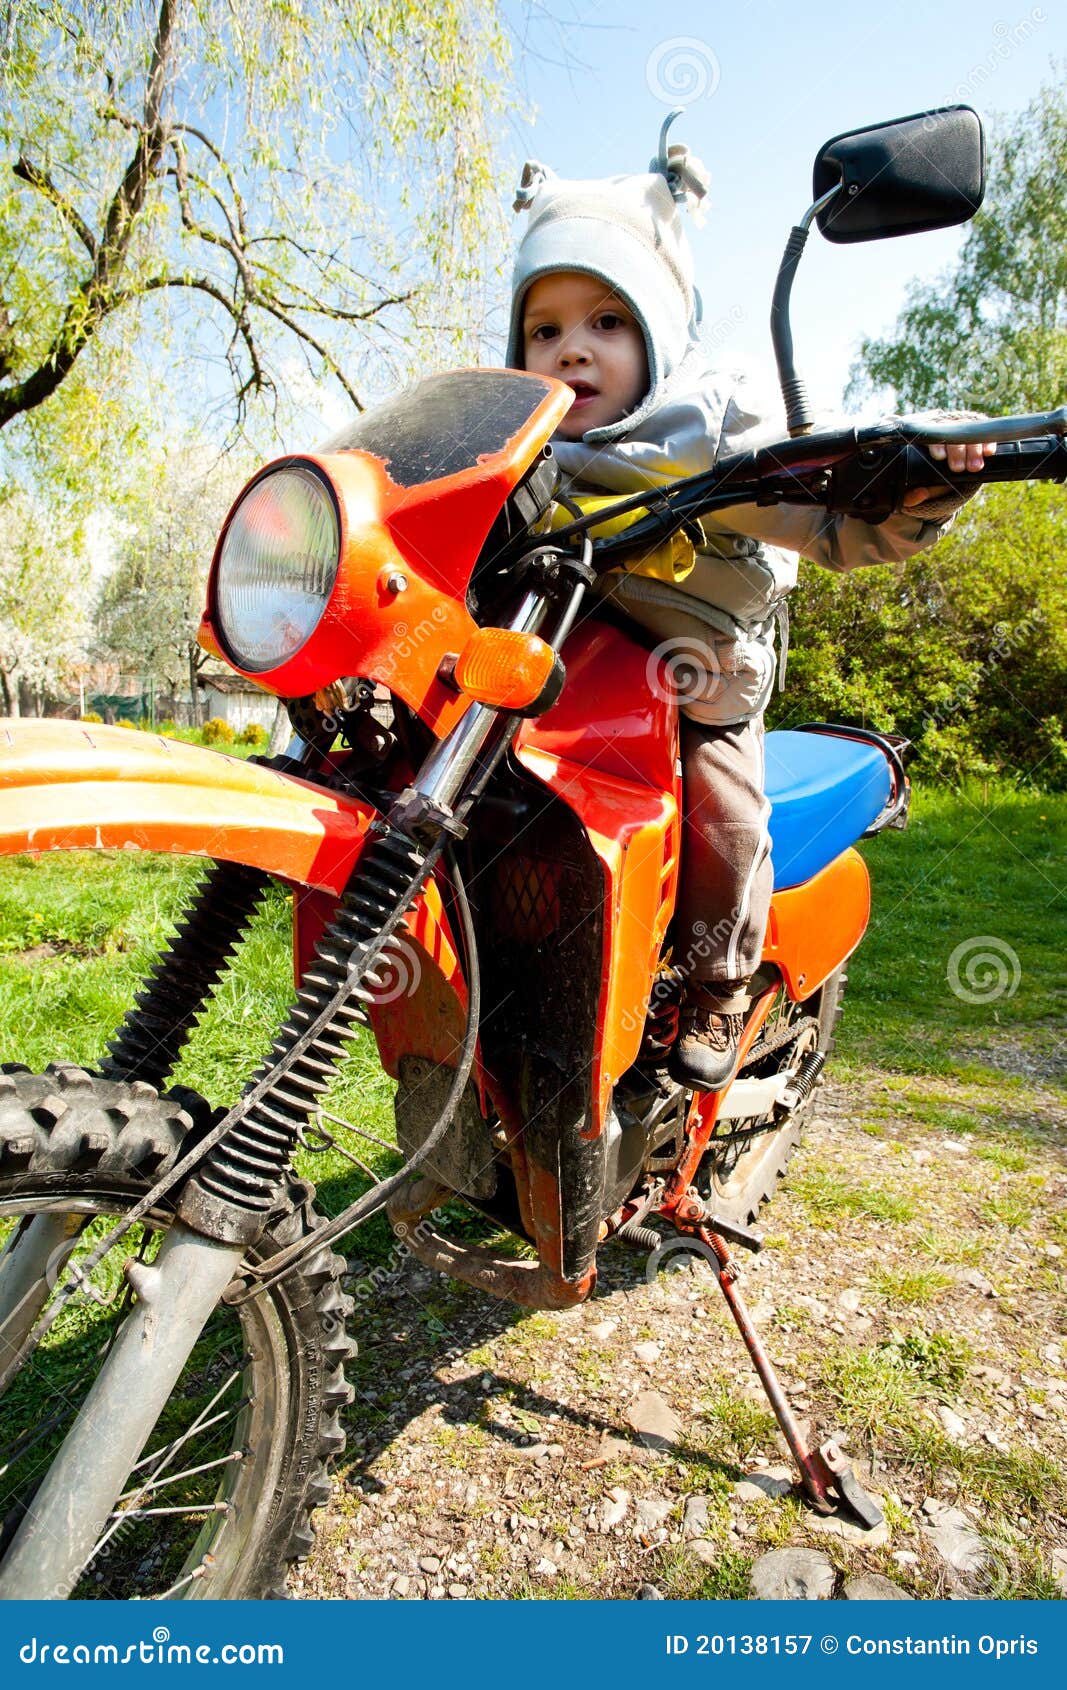 baby riding motorcycle 20138157